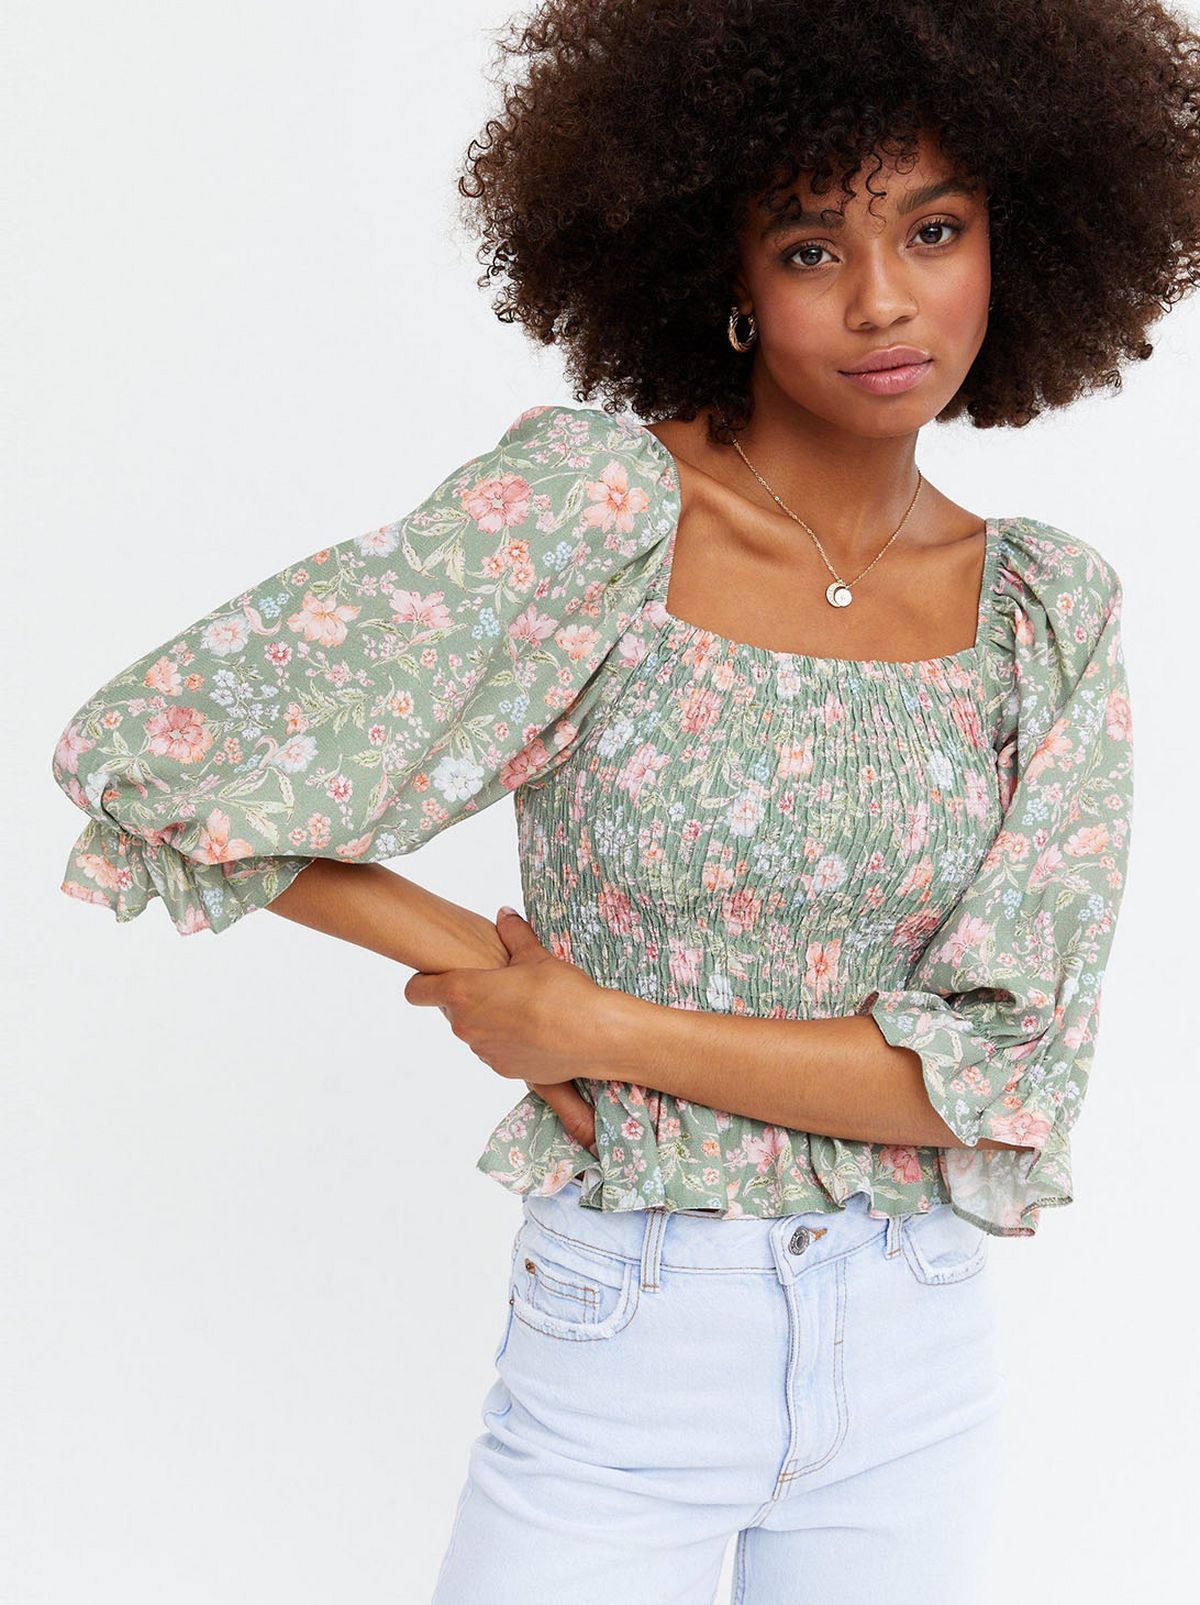 The Best Summer Blouses and Tops